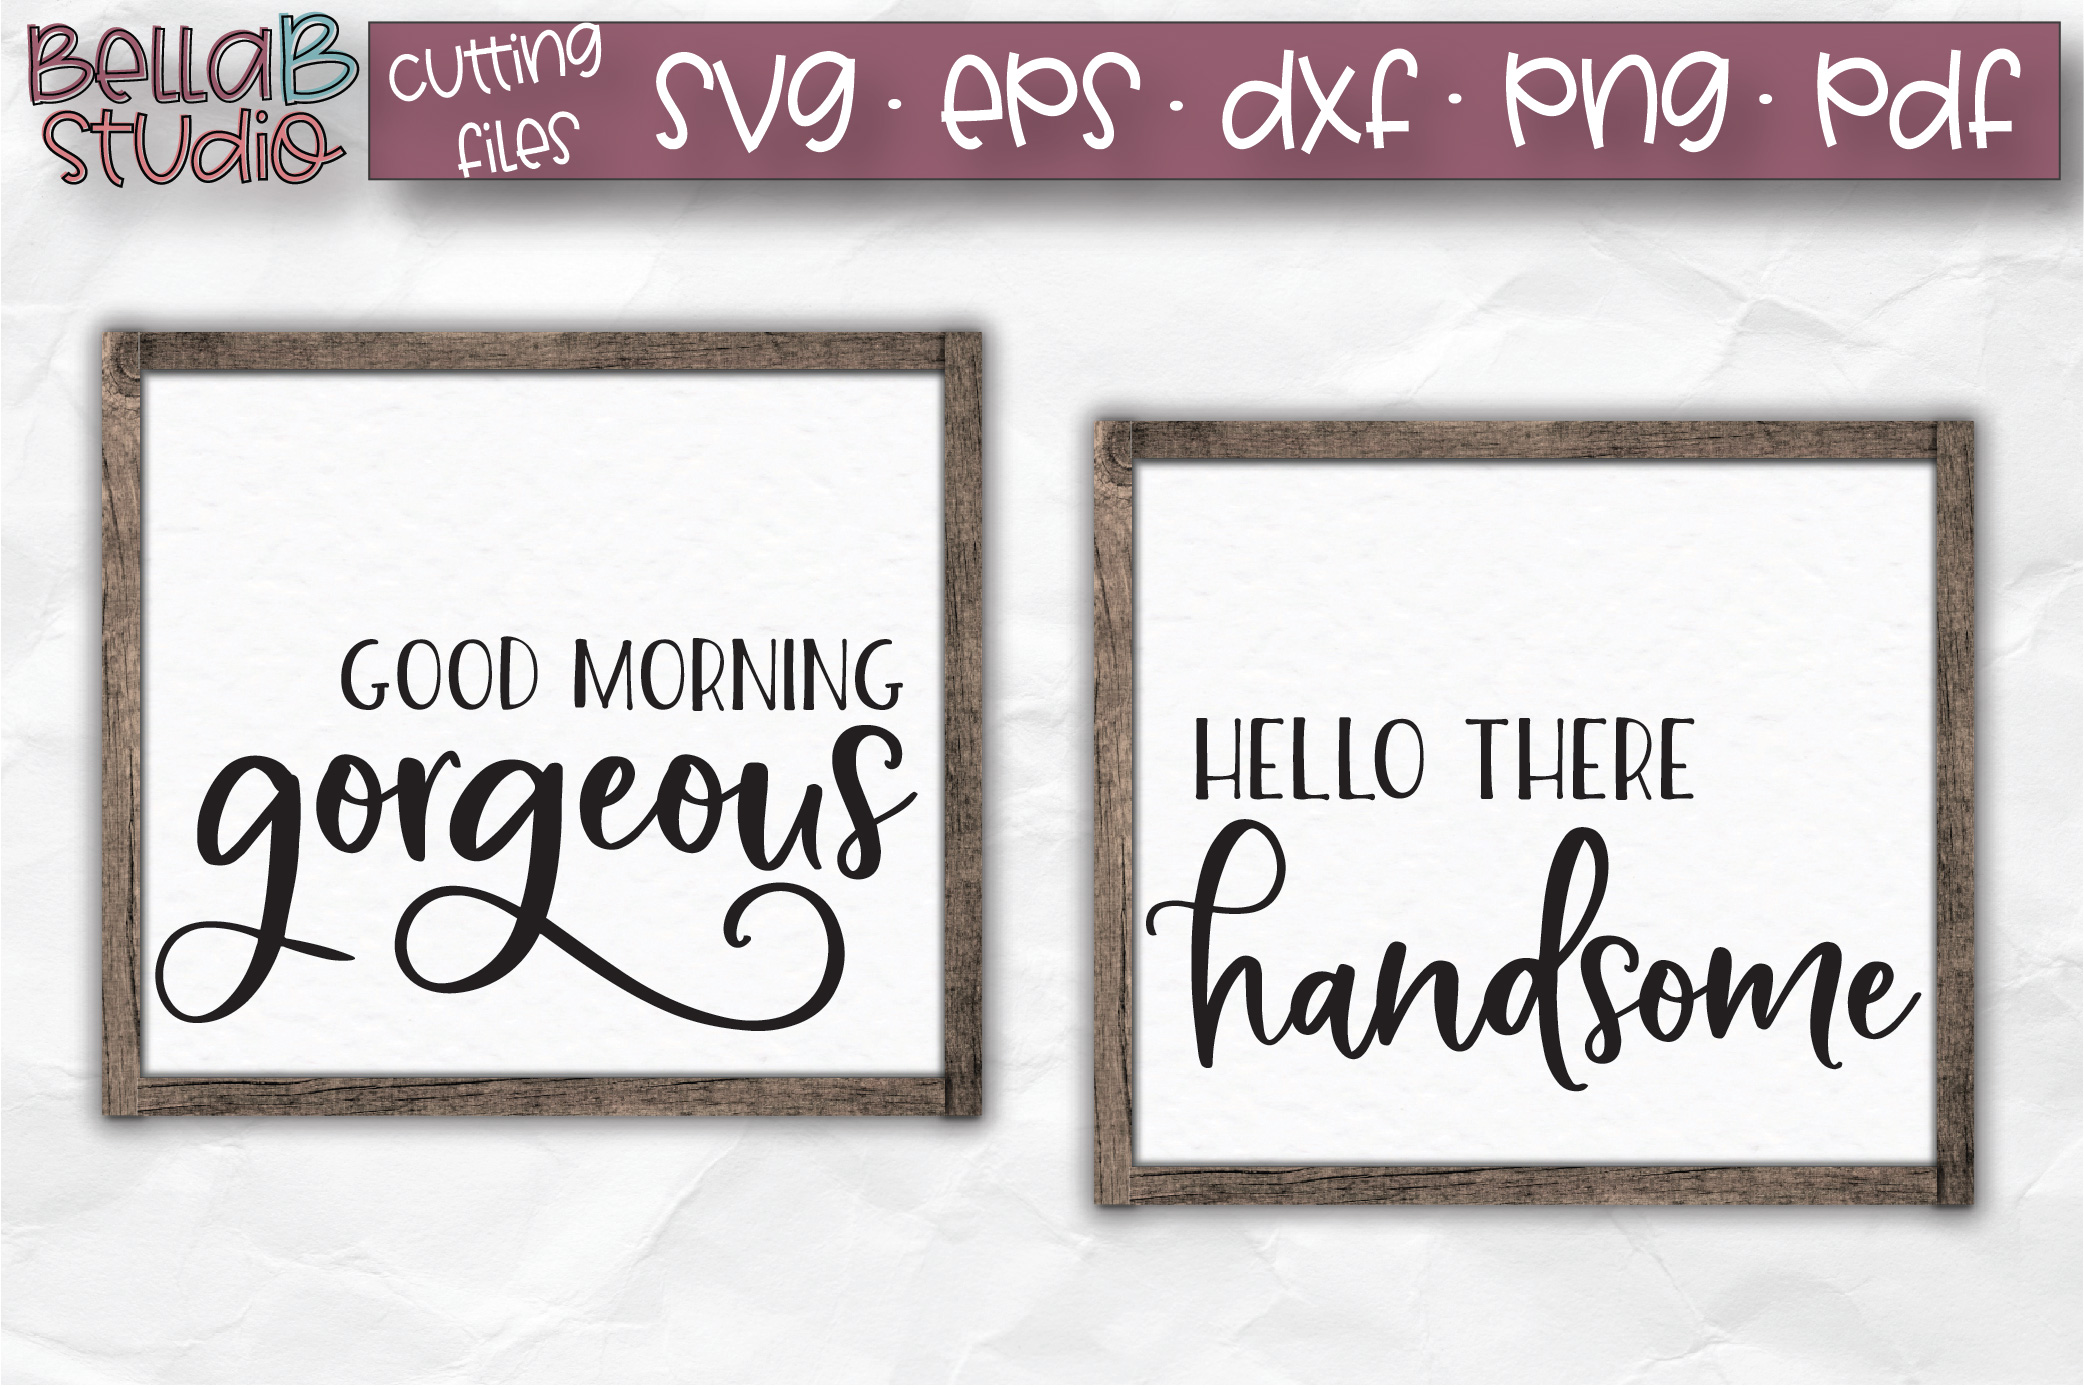 Download Hello There Handsome Good Morning Gorgeous SVG Cut File ...